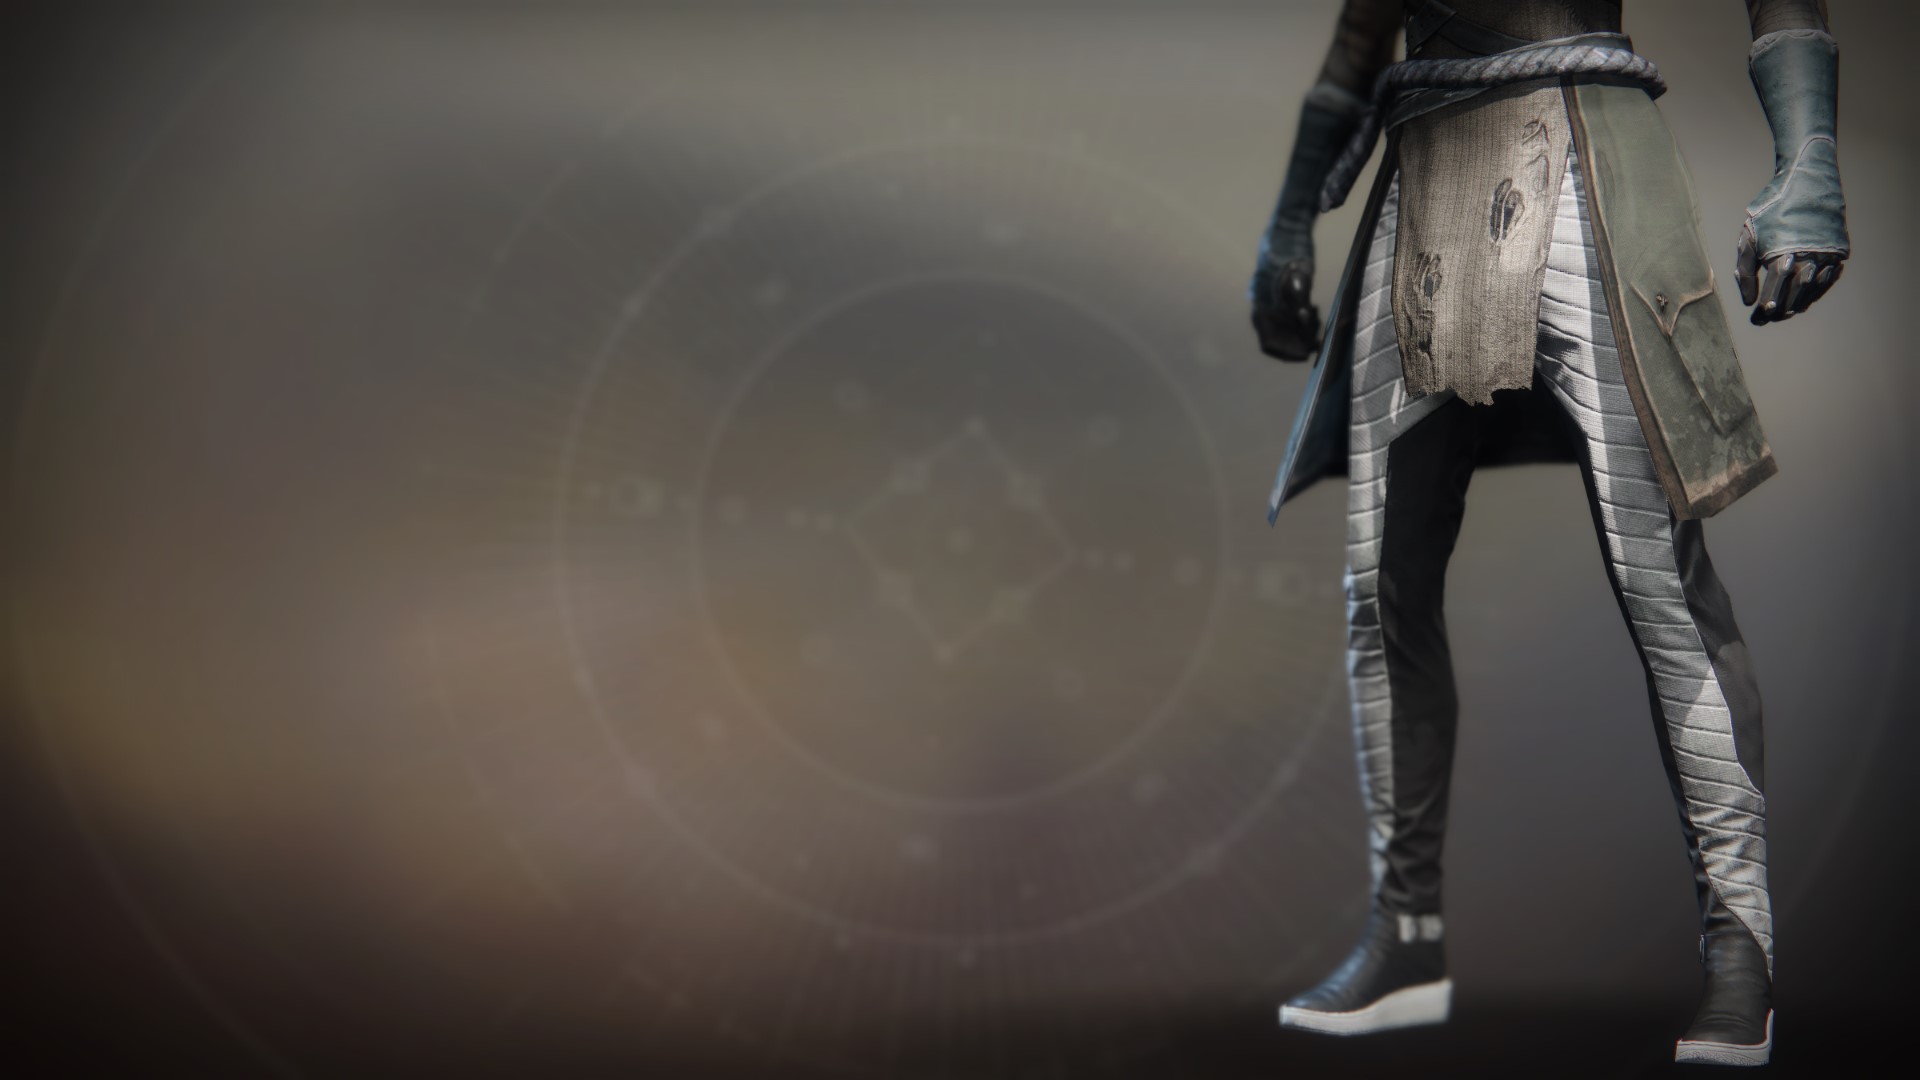 An in-game render of the Competitive Spirit Boots.